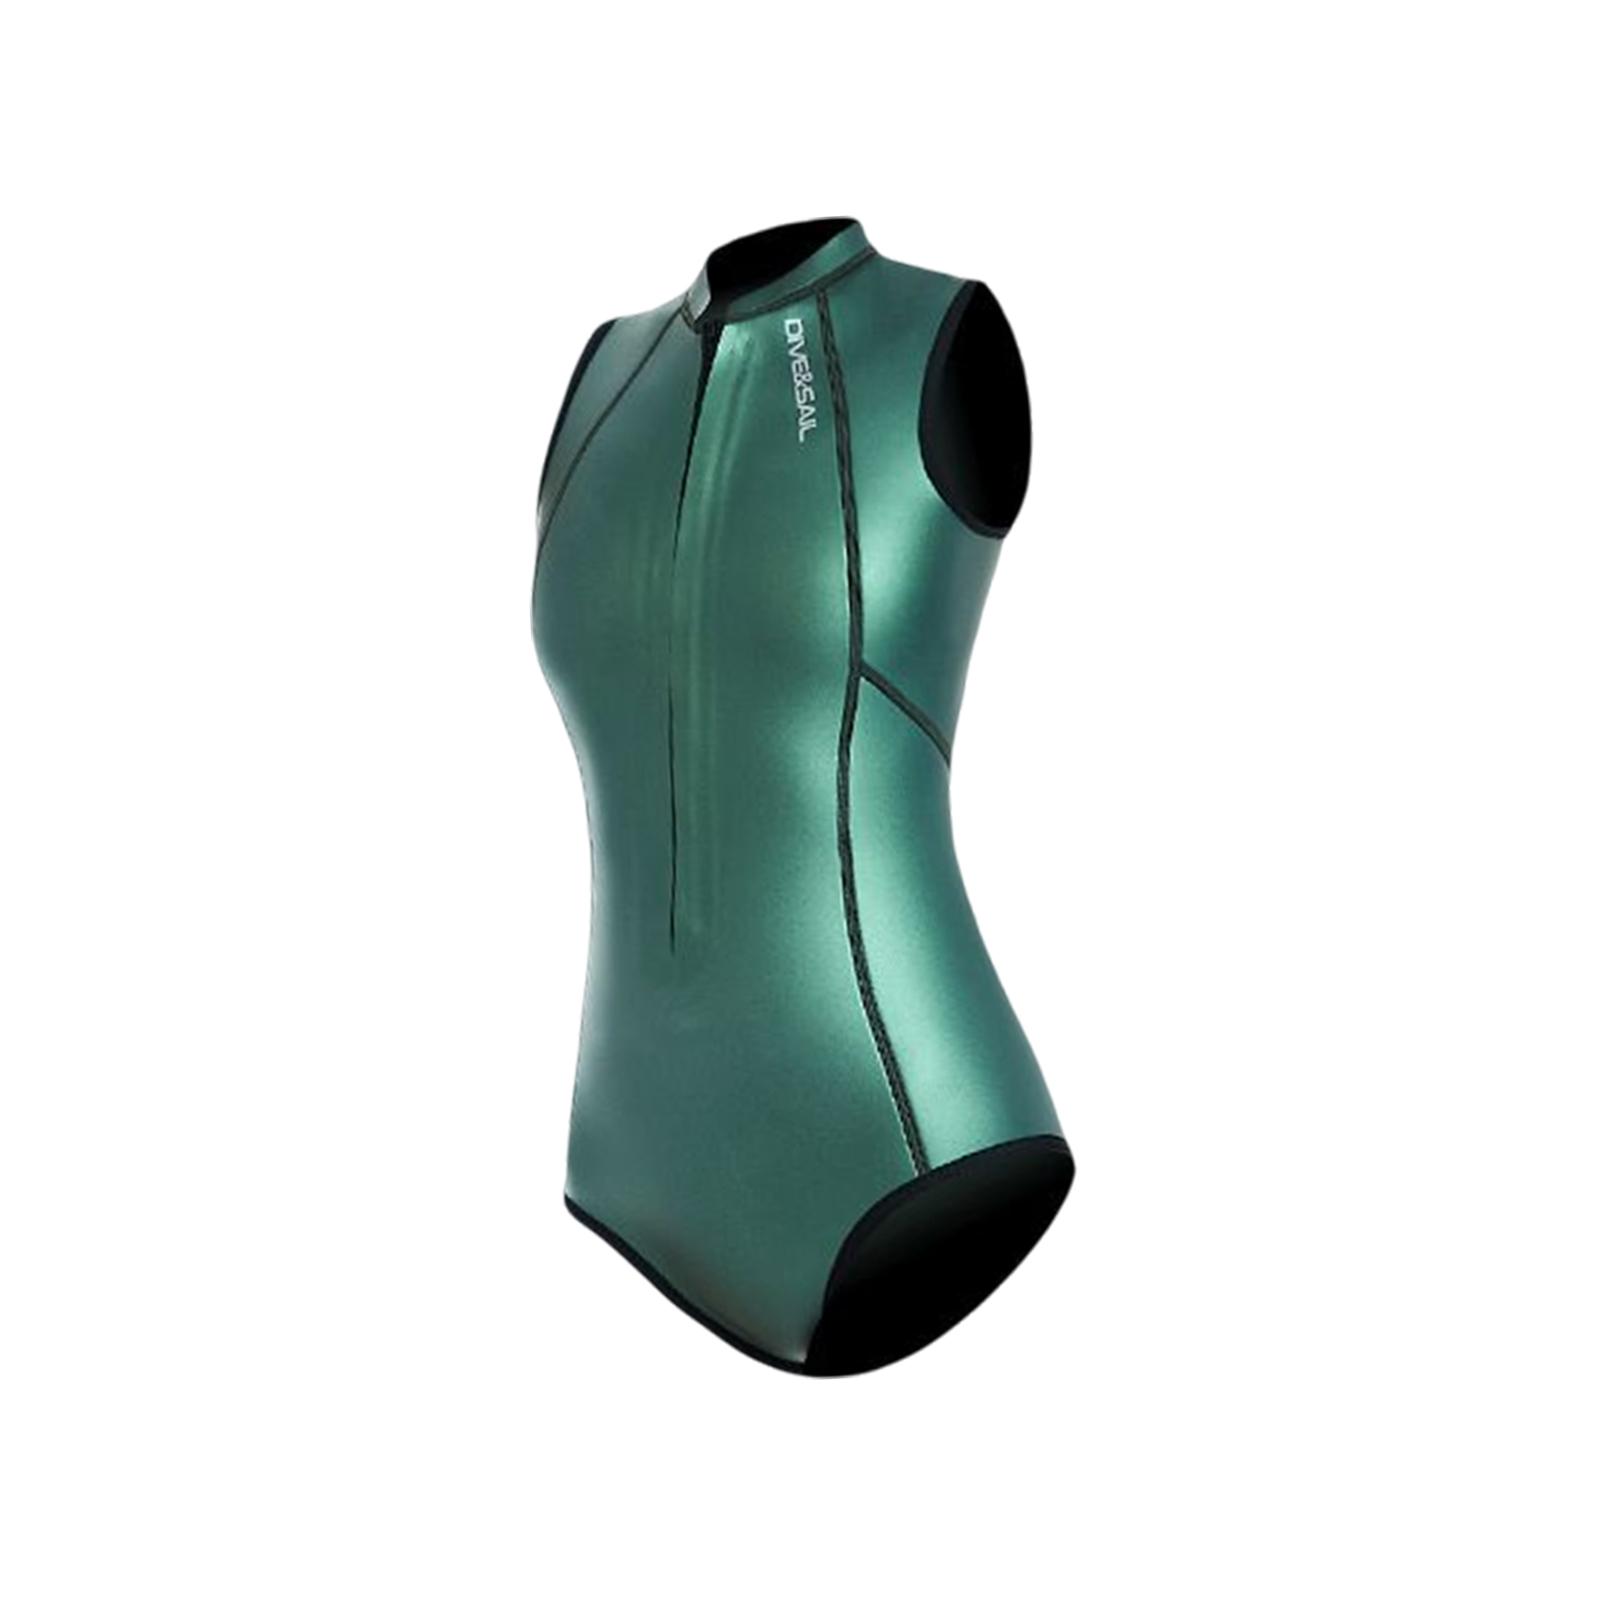 Scuba Diving Suit Women Lightweight Diving Swimwear Fashion for Snorkeling Green Color M